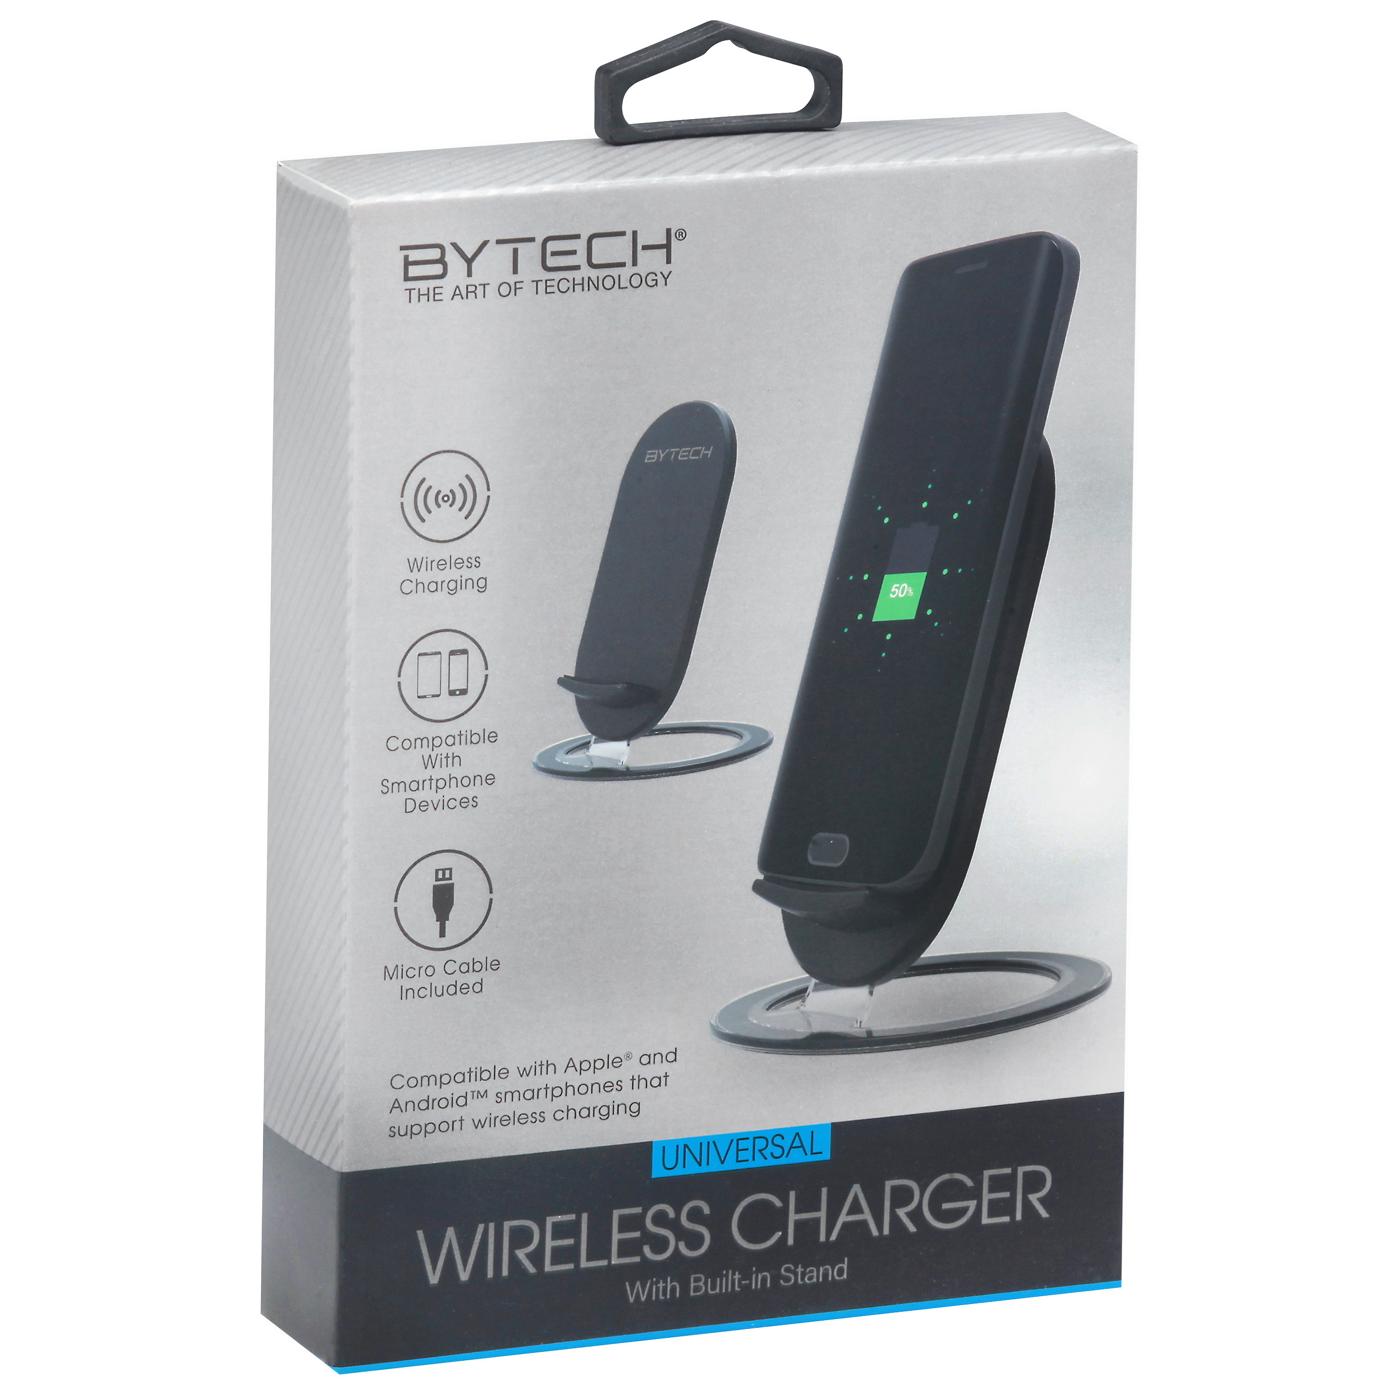 Bytech Universal Rapid Charge Wireless Charger with Stand - Black; image 1 of 2